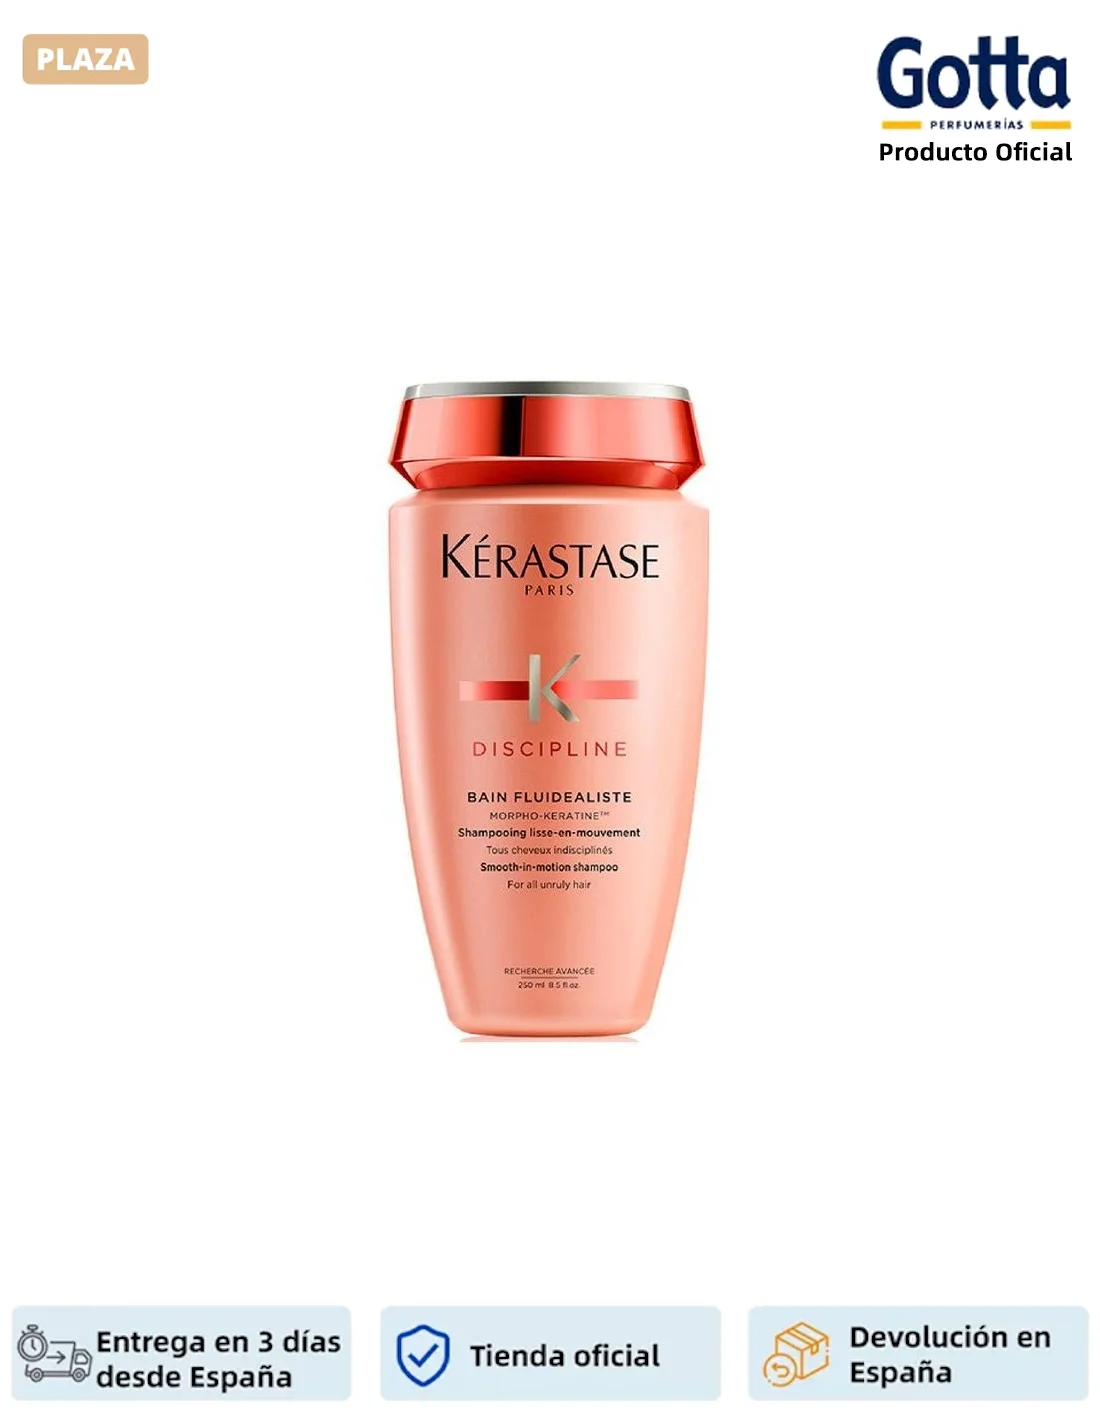 KERASTASE-DISCIPLINE NORMAL shampoo-250 ML-beauty and health, hair care and styling, shampoo and shampoos-hydrated hair.